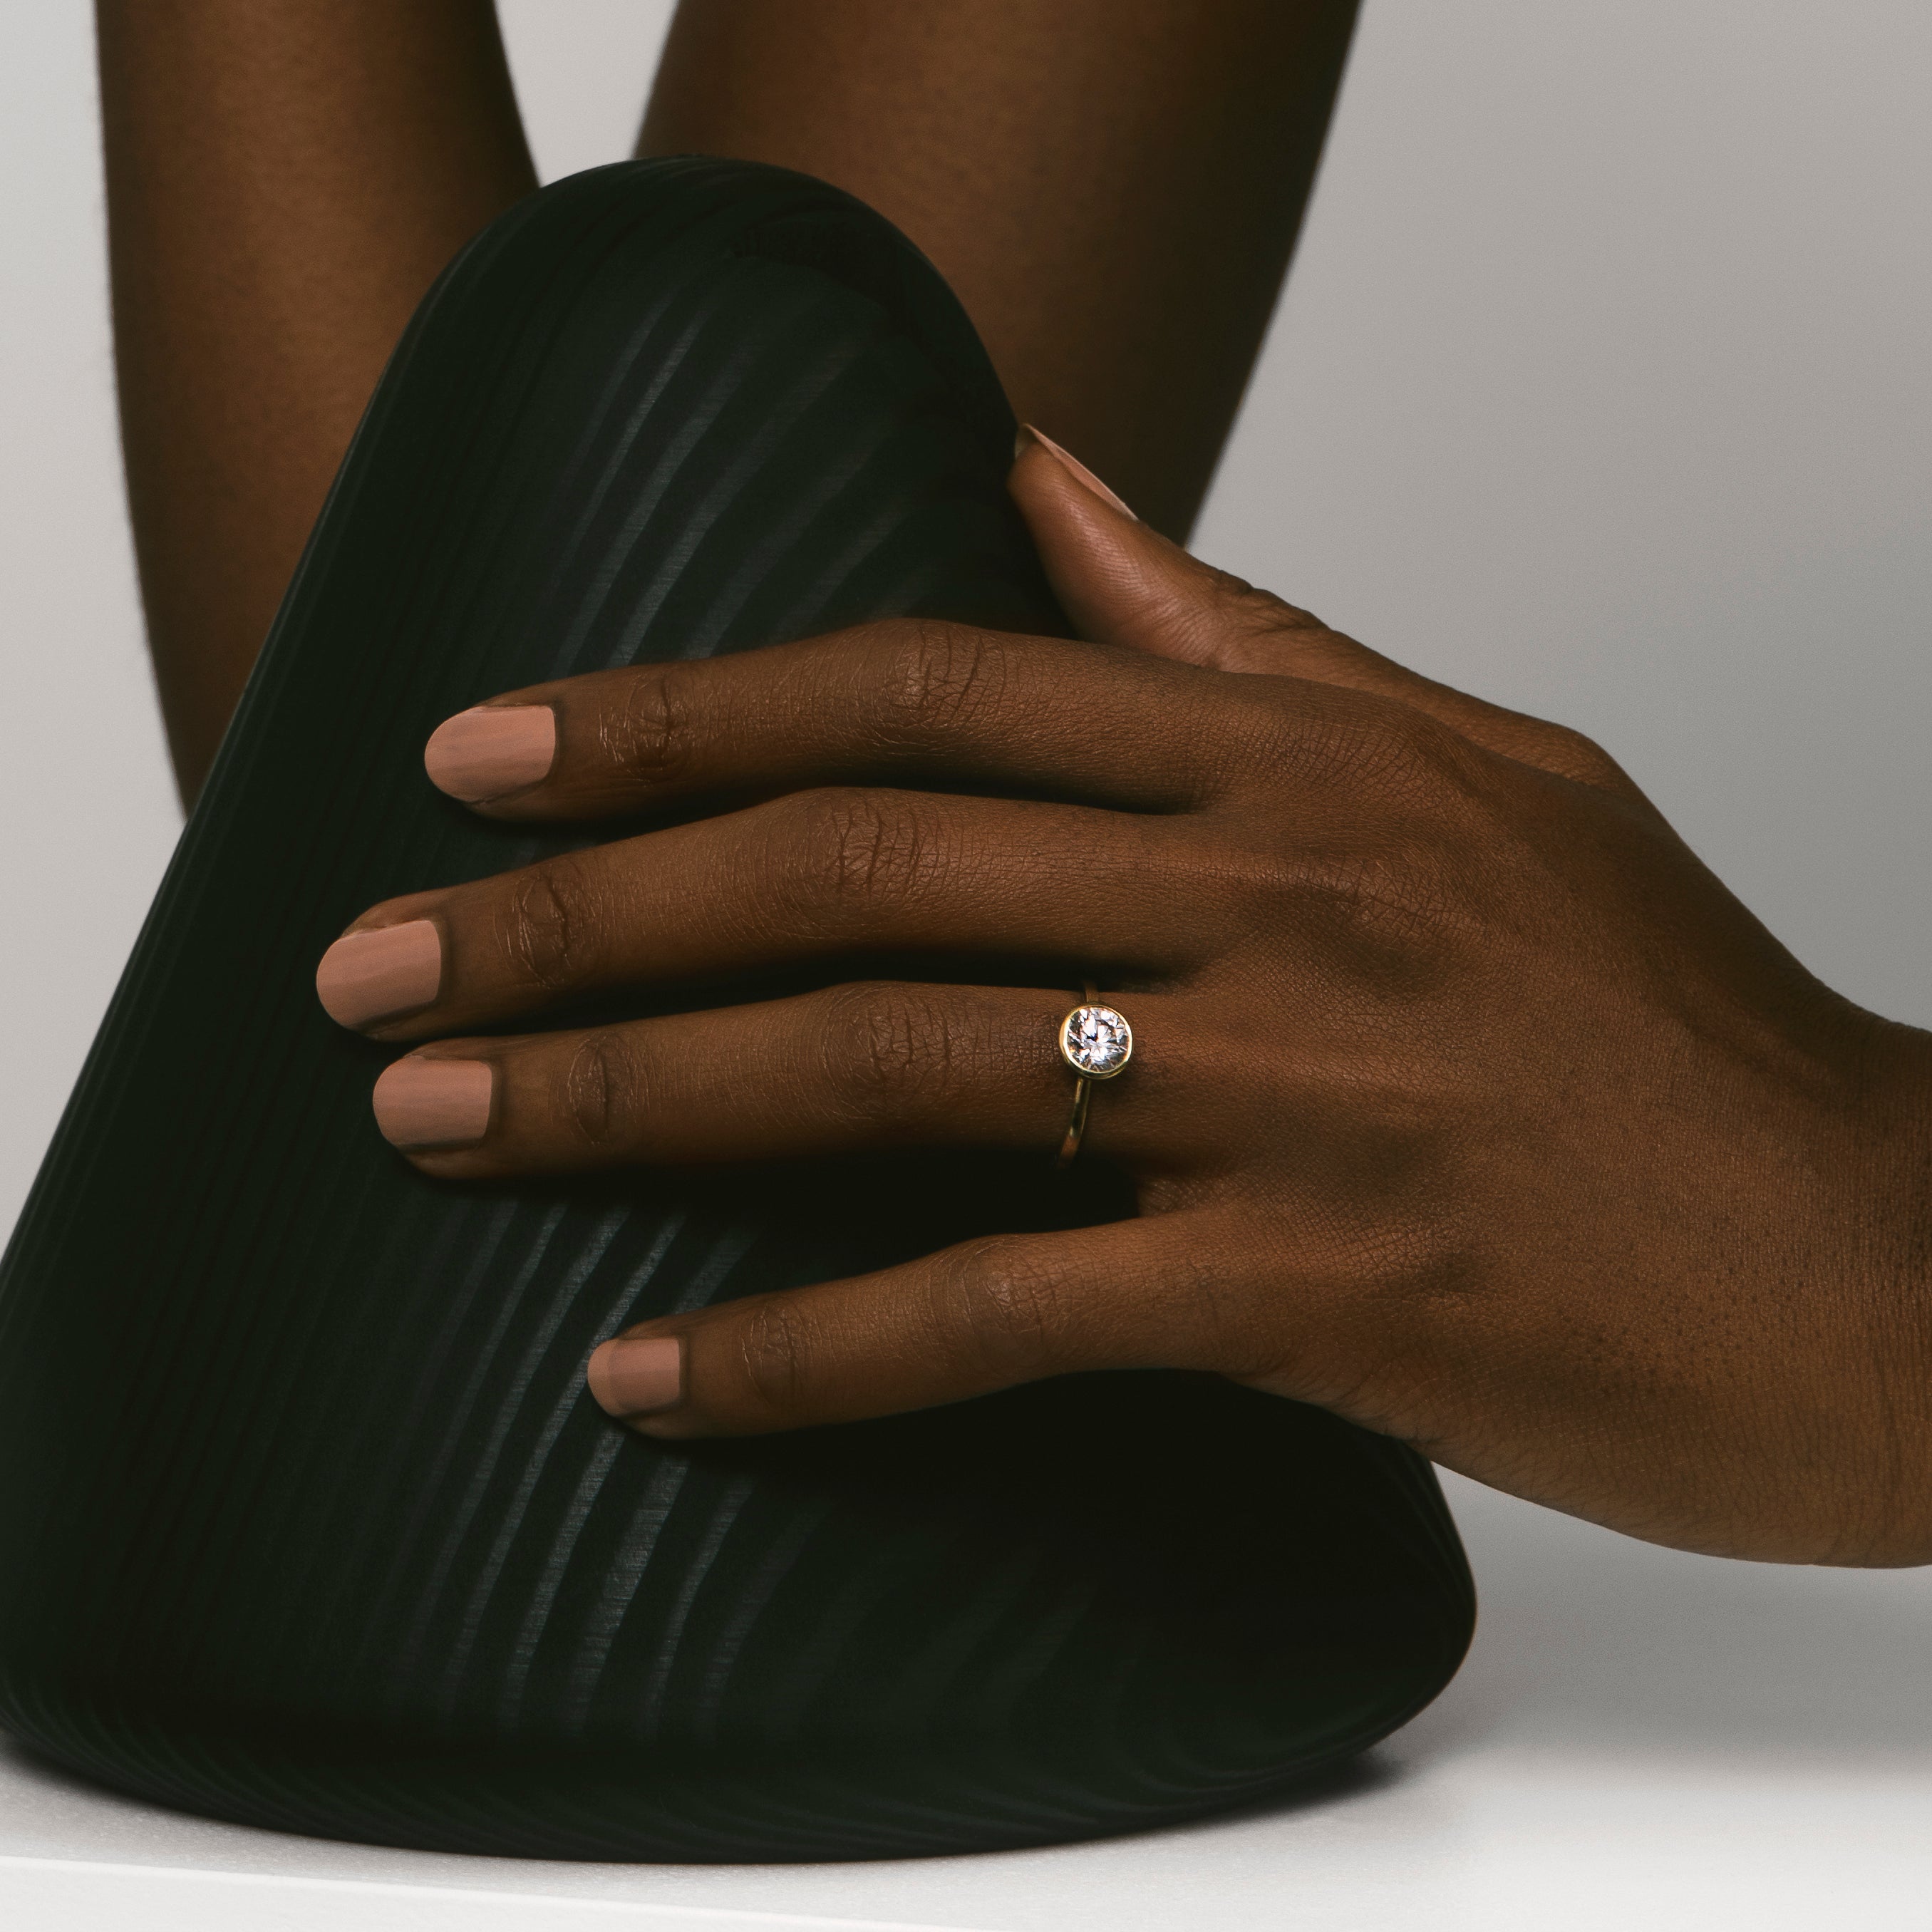 Mana Minimalist Engagement Ring in sustainable 14k Gold set with a 1.01ct round brilliant cut lab-grown diamond By SHW Fine Jewelry NYC